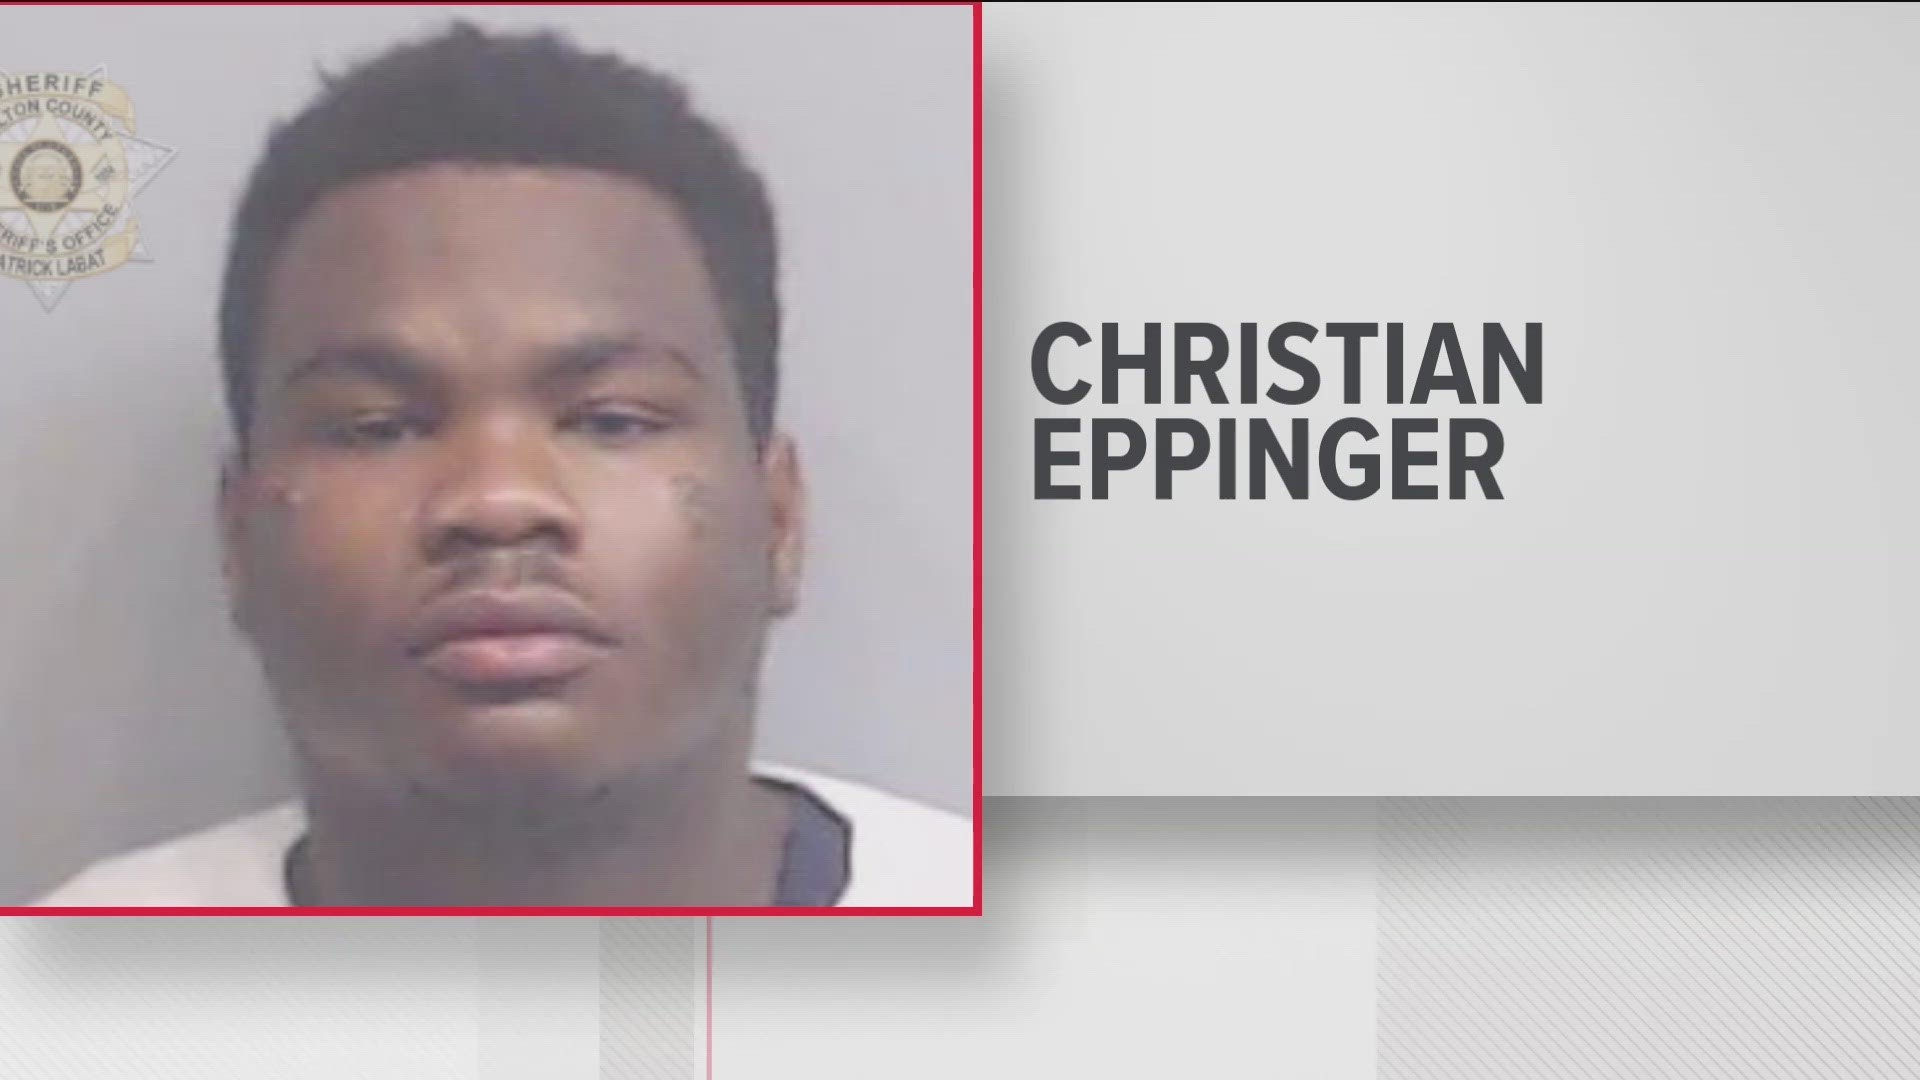 Christian Eppinger is facing charges in the YSL case and a case where an APD officer was shot earlier this year.